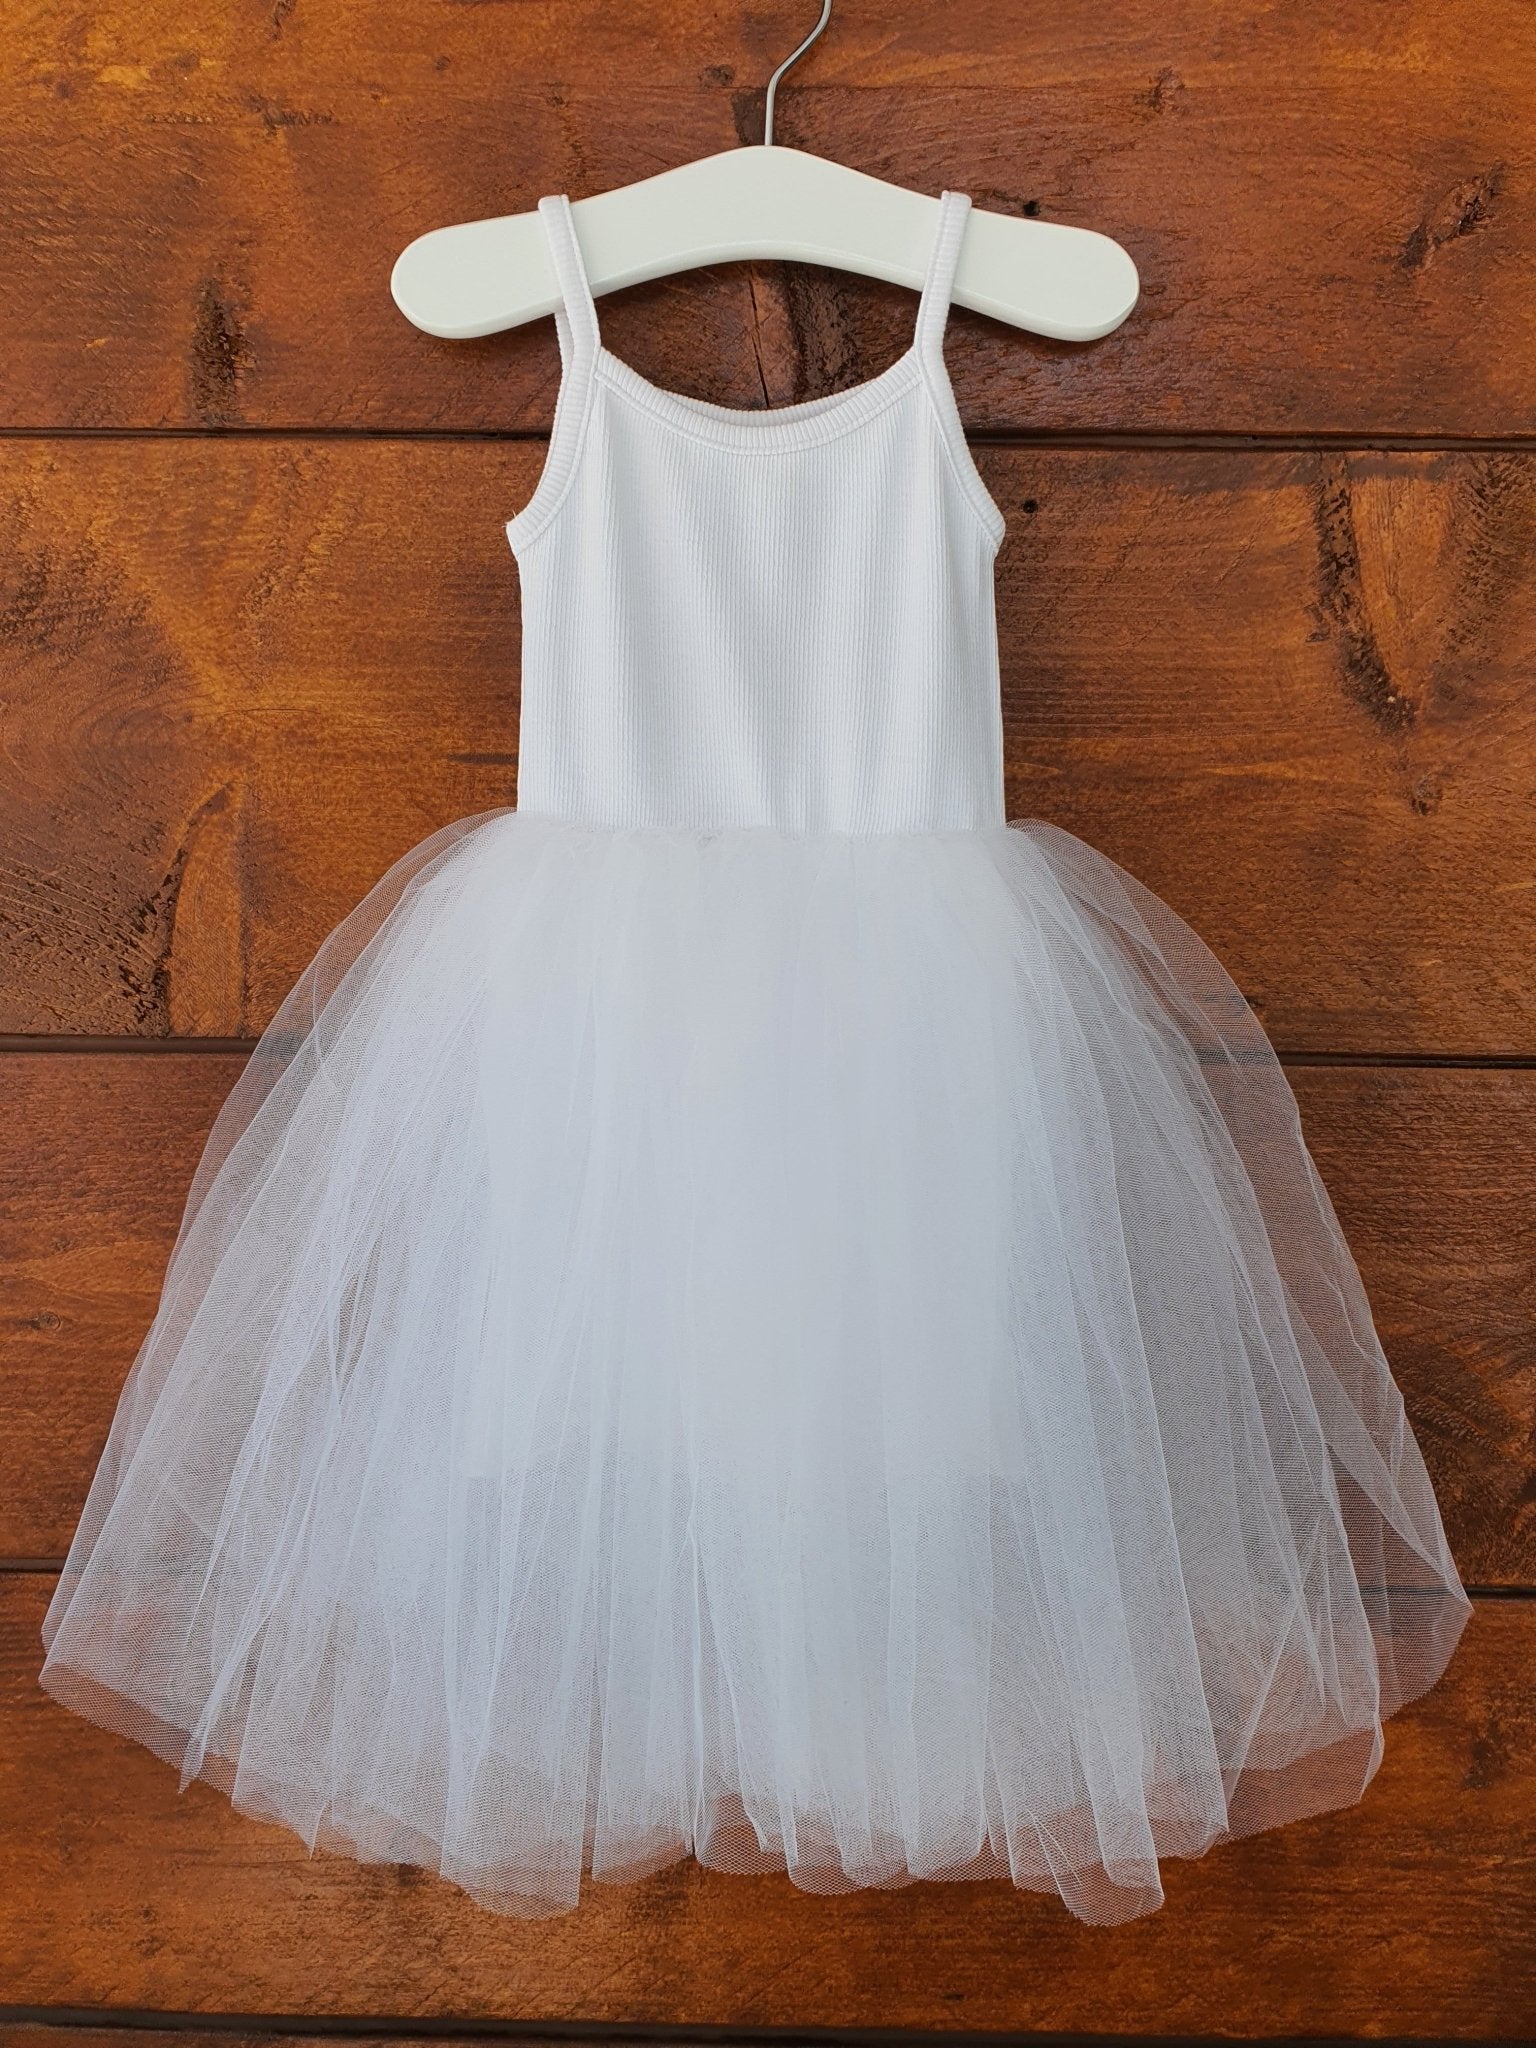 Personalised Ballerina Tulle Flower Girl DressKiddioClothes